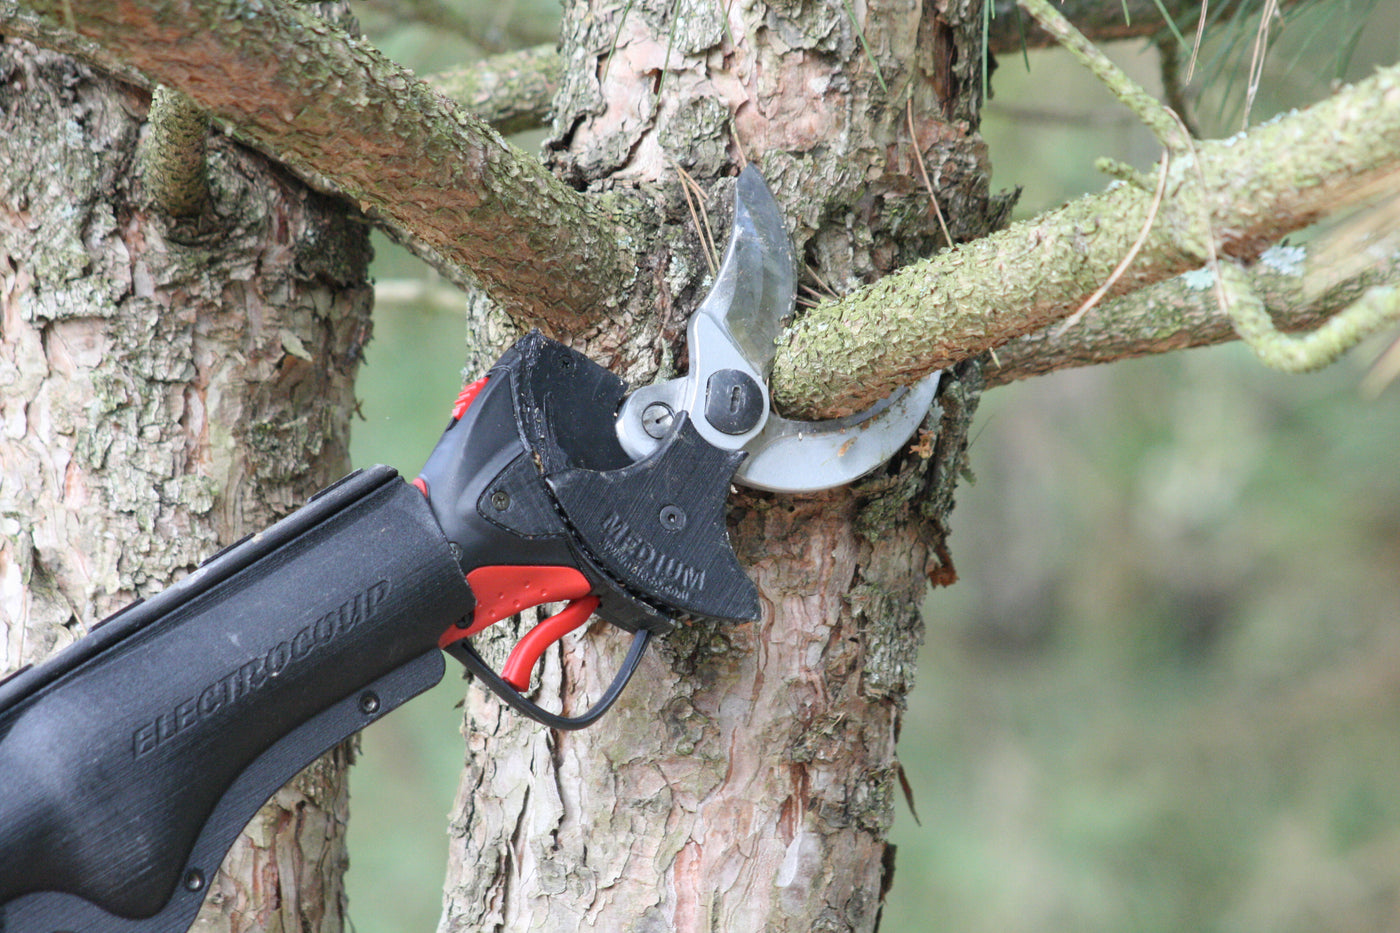 INFACO carbon fiber extension pole for F3015 pruning shear